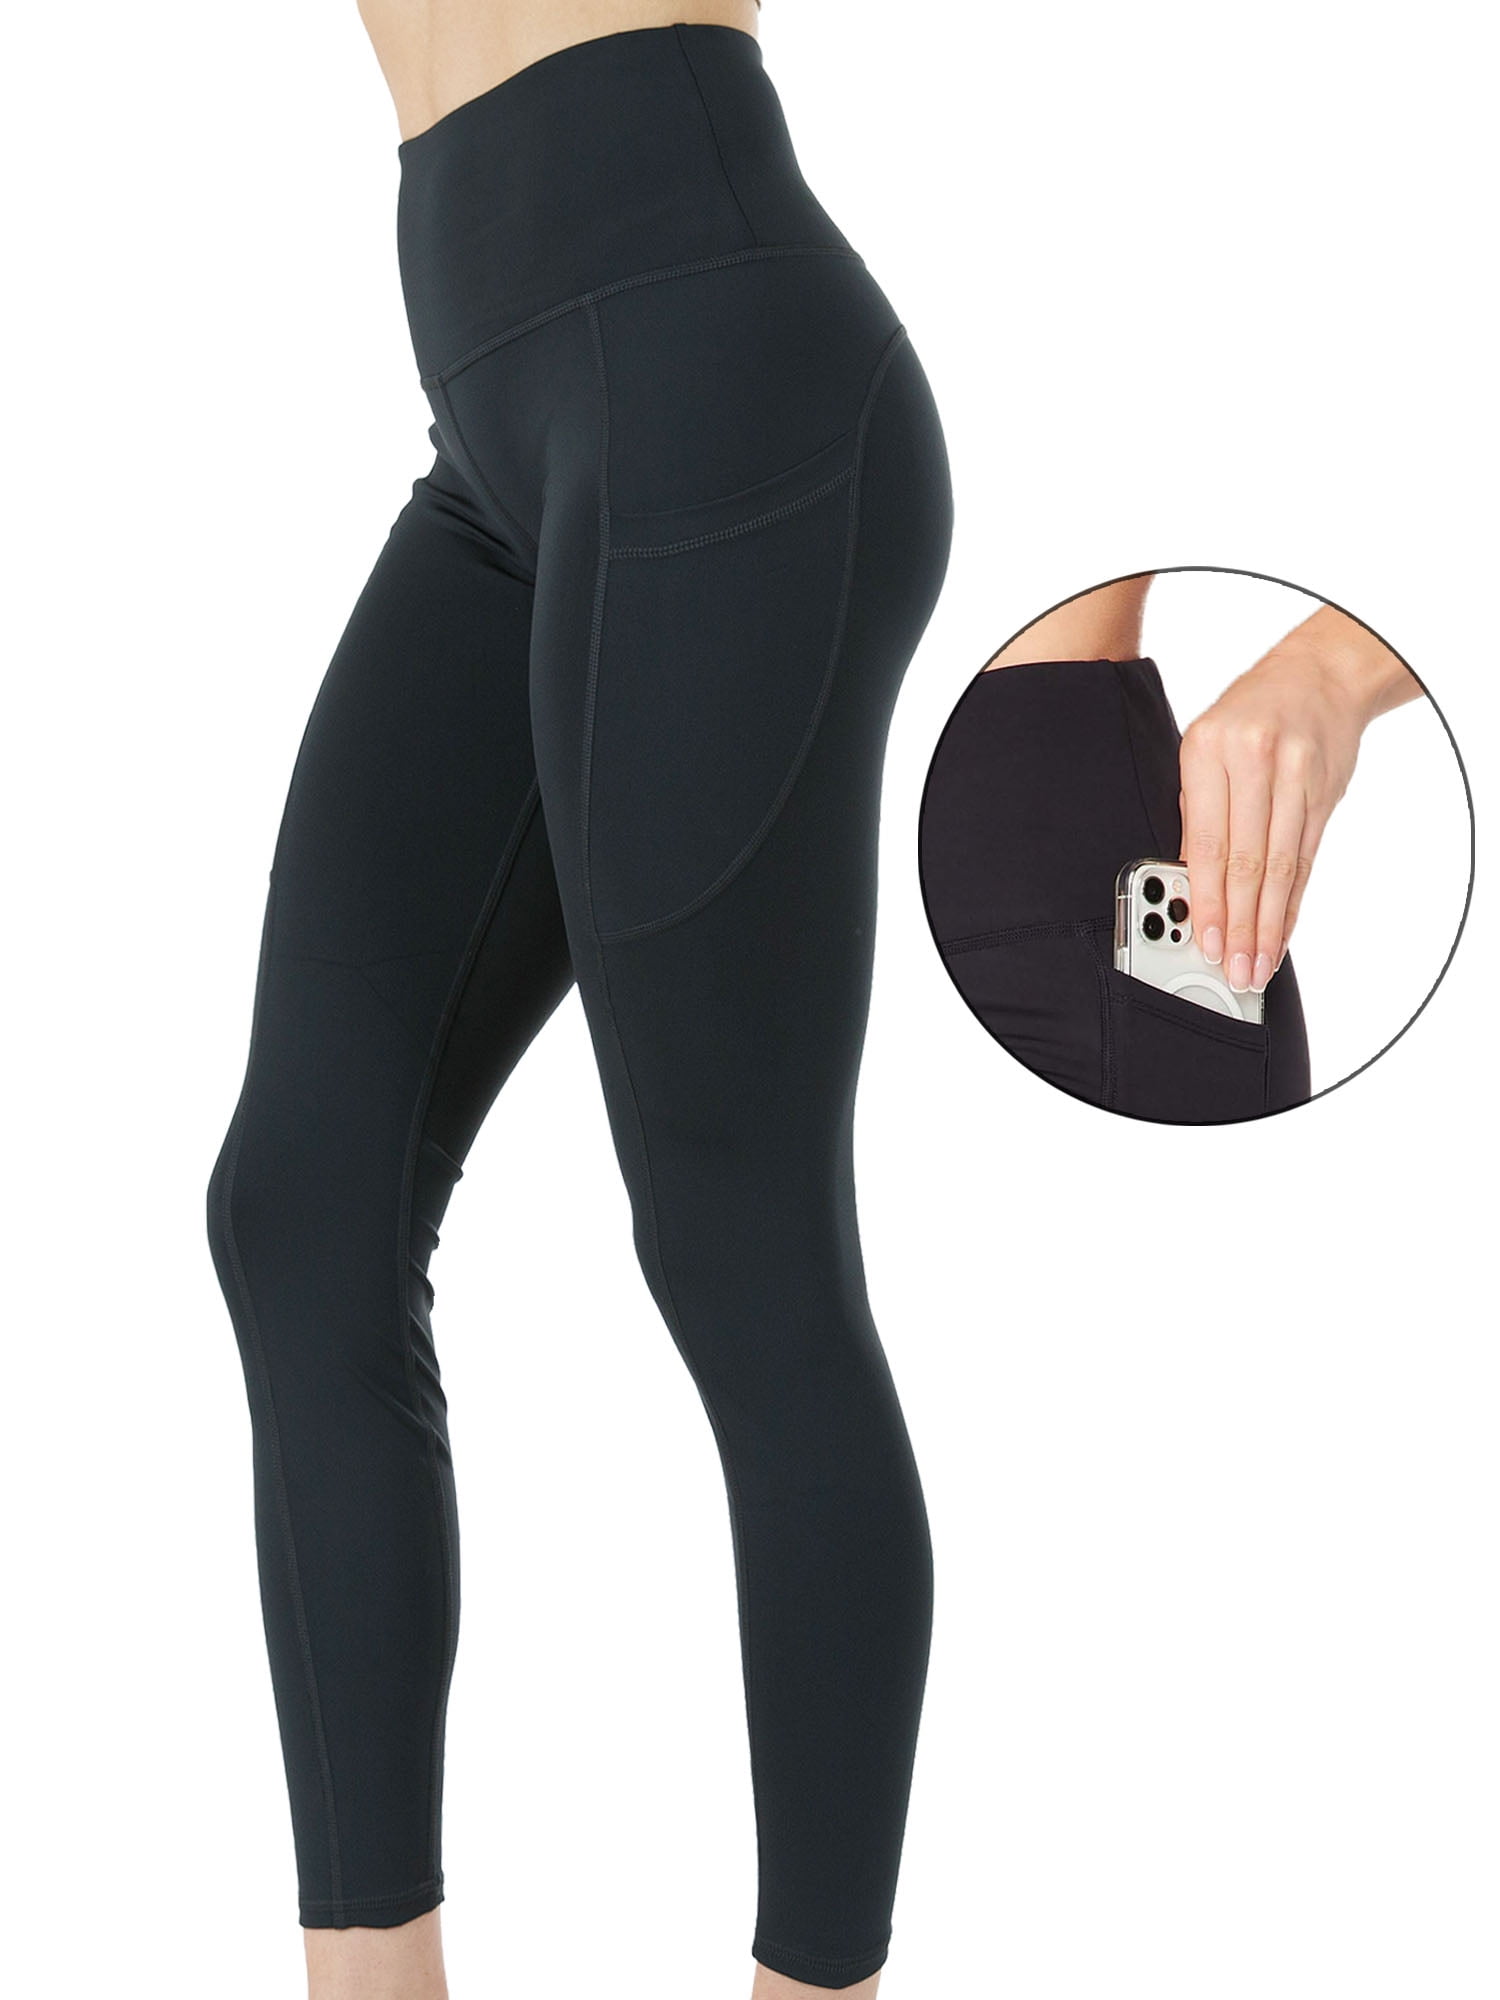 PHISOCKAT Women's High Waist Yoga Pants with Pockets, Leggings with Pockets,  Tummy Control Workout Yoga Leggings 